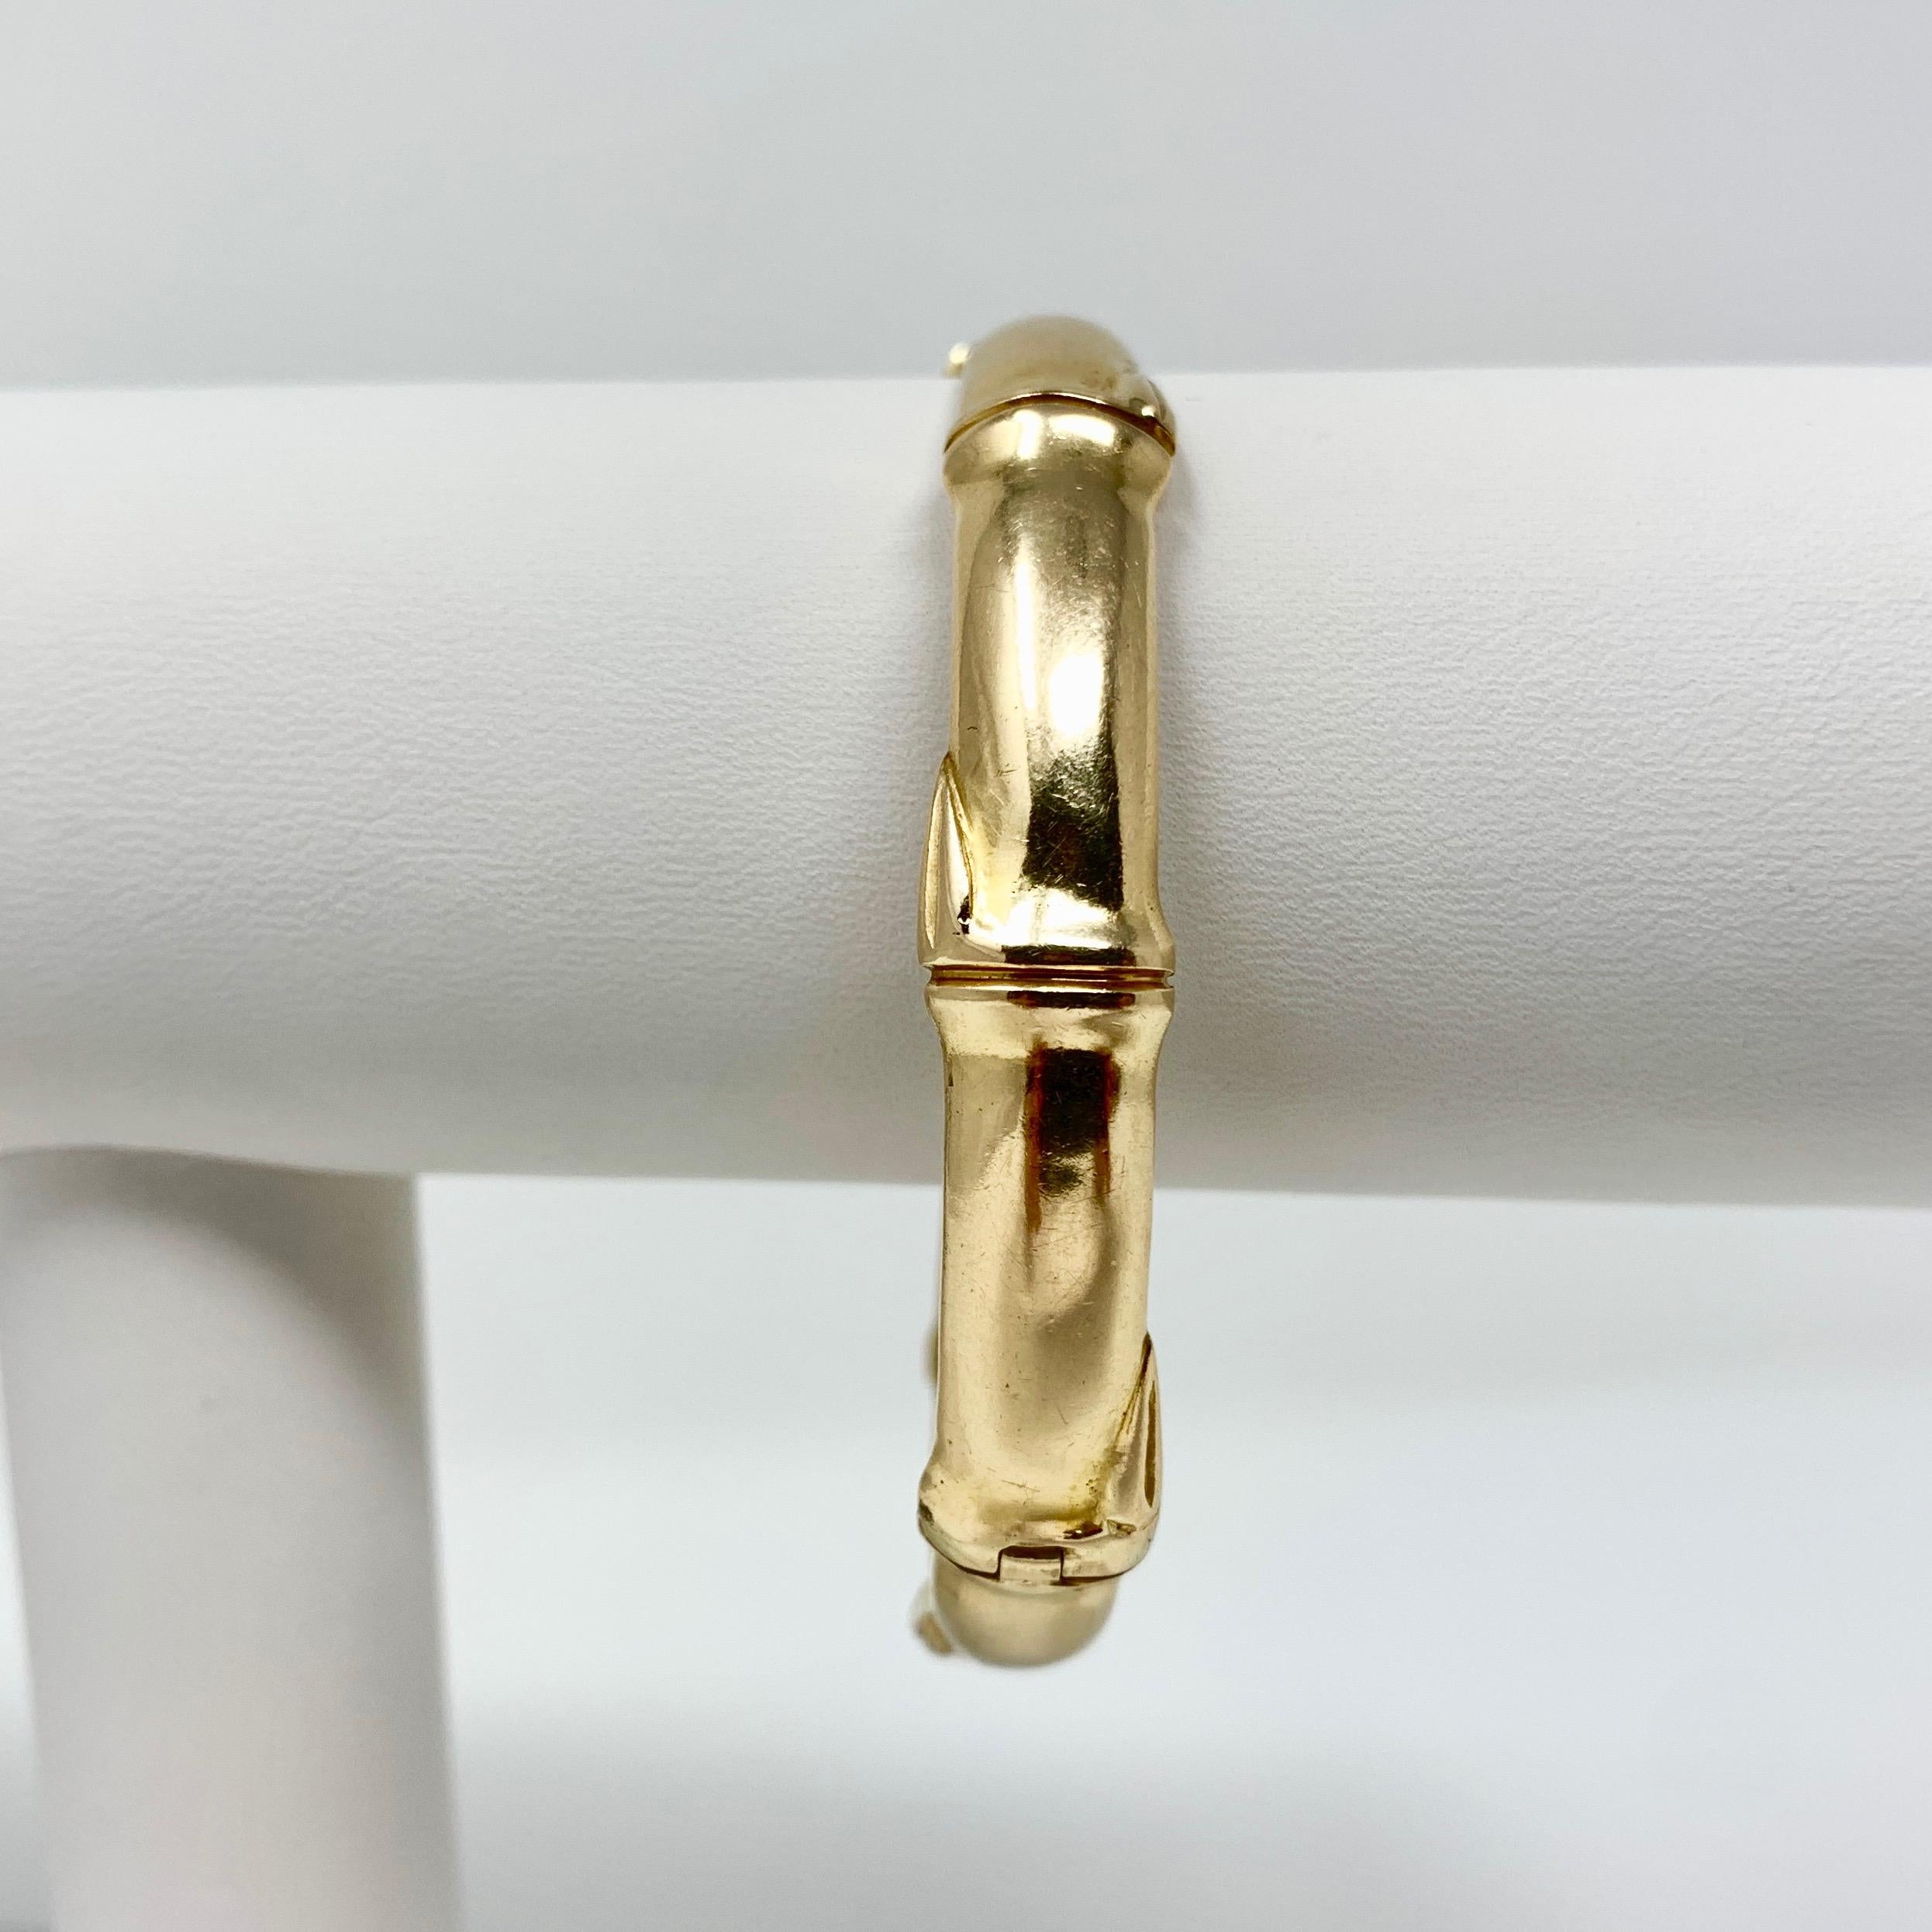 14k Yellow Gold Vintage Ming's Hawaii HK Bamboo Bangle Bracelet 7.5 Inches

Condition:  Very Good Condition, Professionally Cleaned and Polished
Metal:  14k Gold (Marked, and Professionally Tested)
Weight:  21.6g
Length:  7.5 Inches Inner